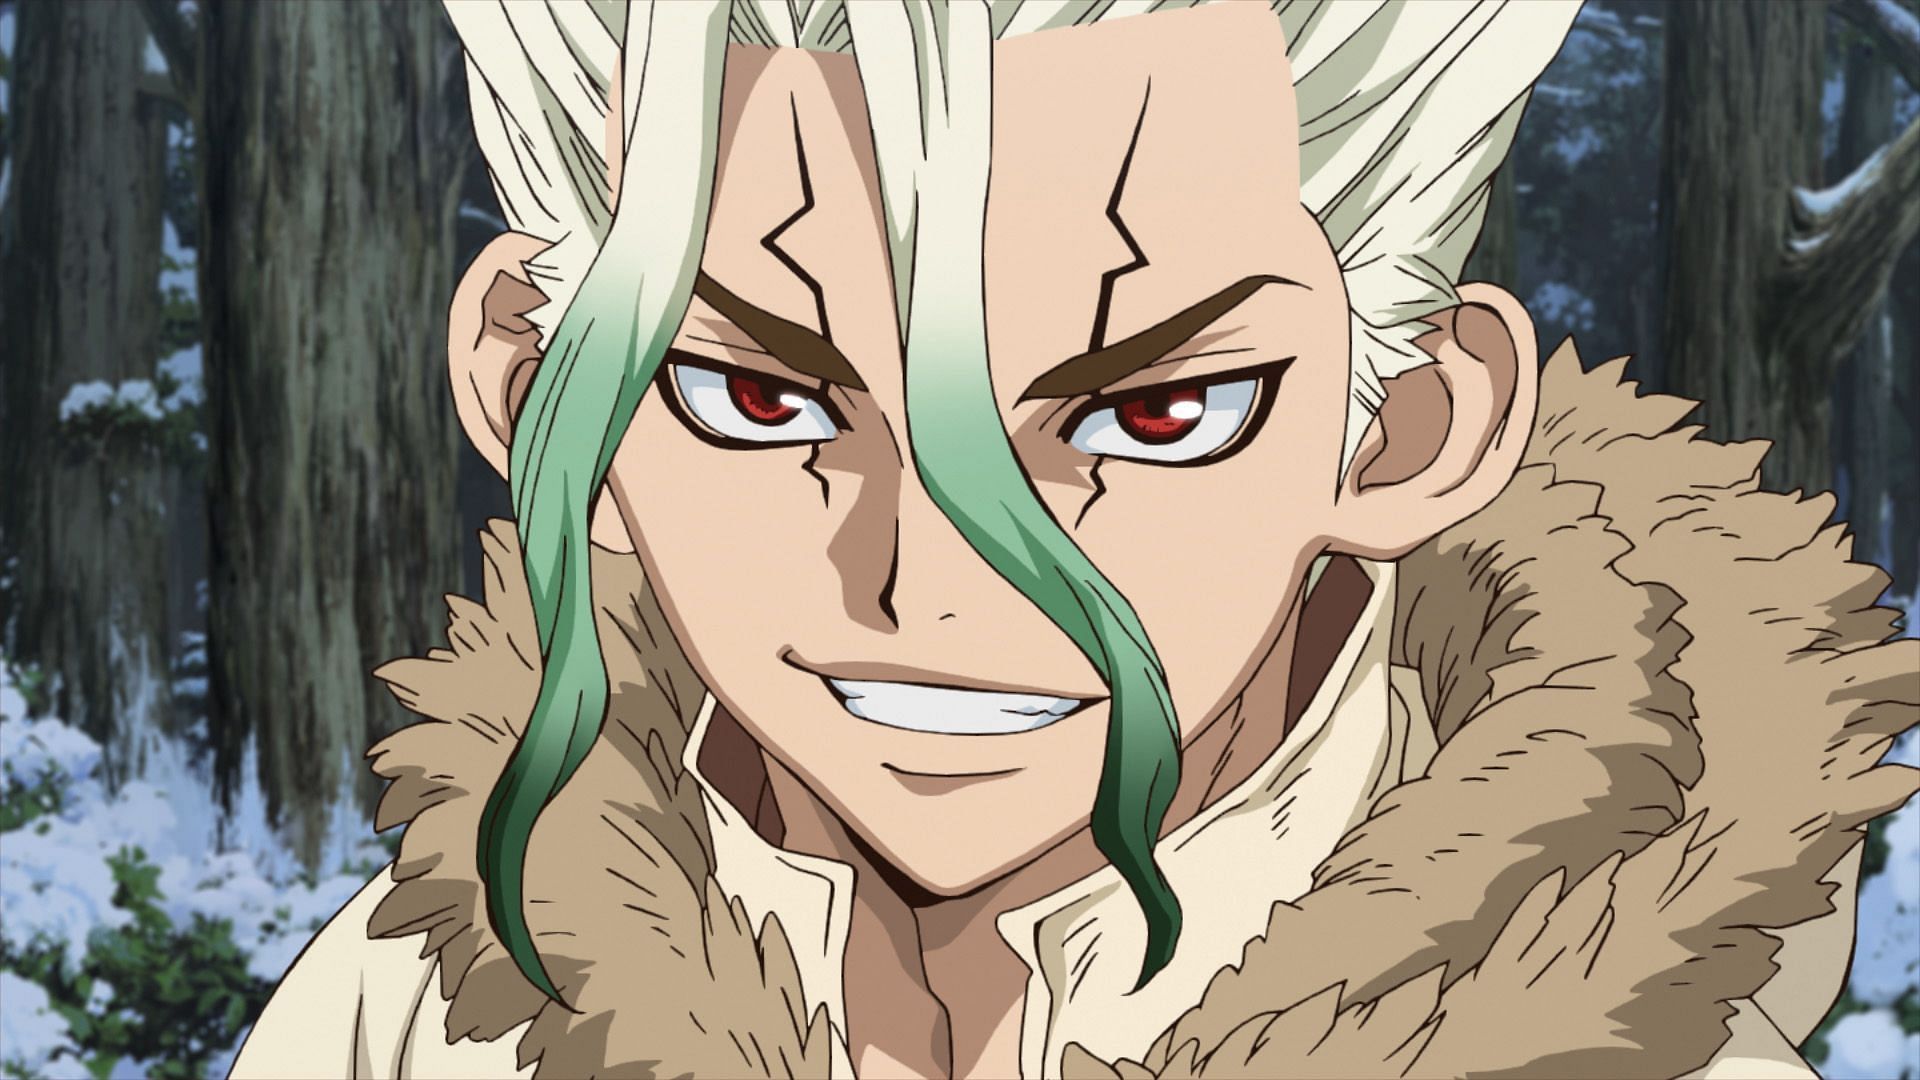 Dr. Stone Chapter 231 sees Senku&#039;s negotiations with Why-man end (Image via TMS Entertainment)